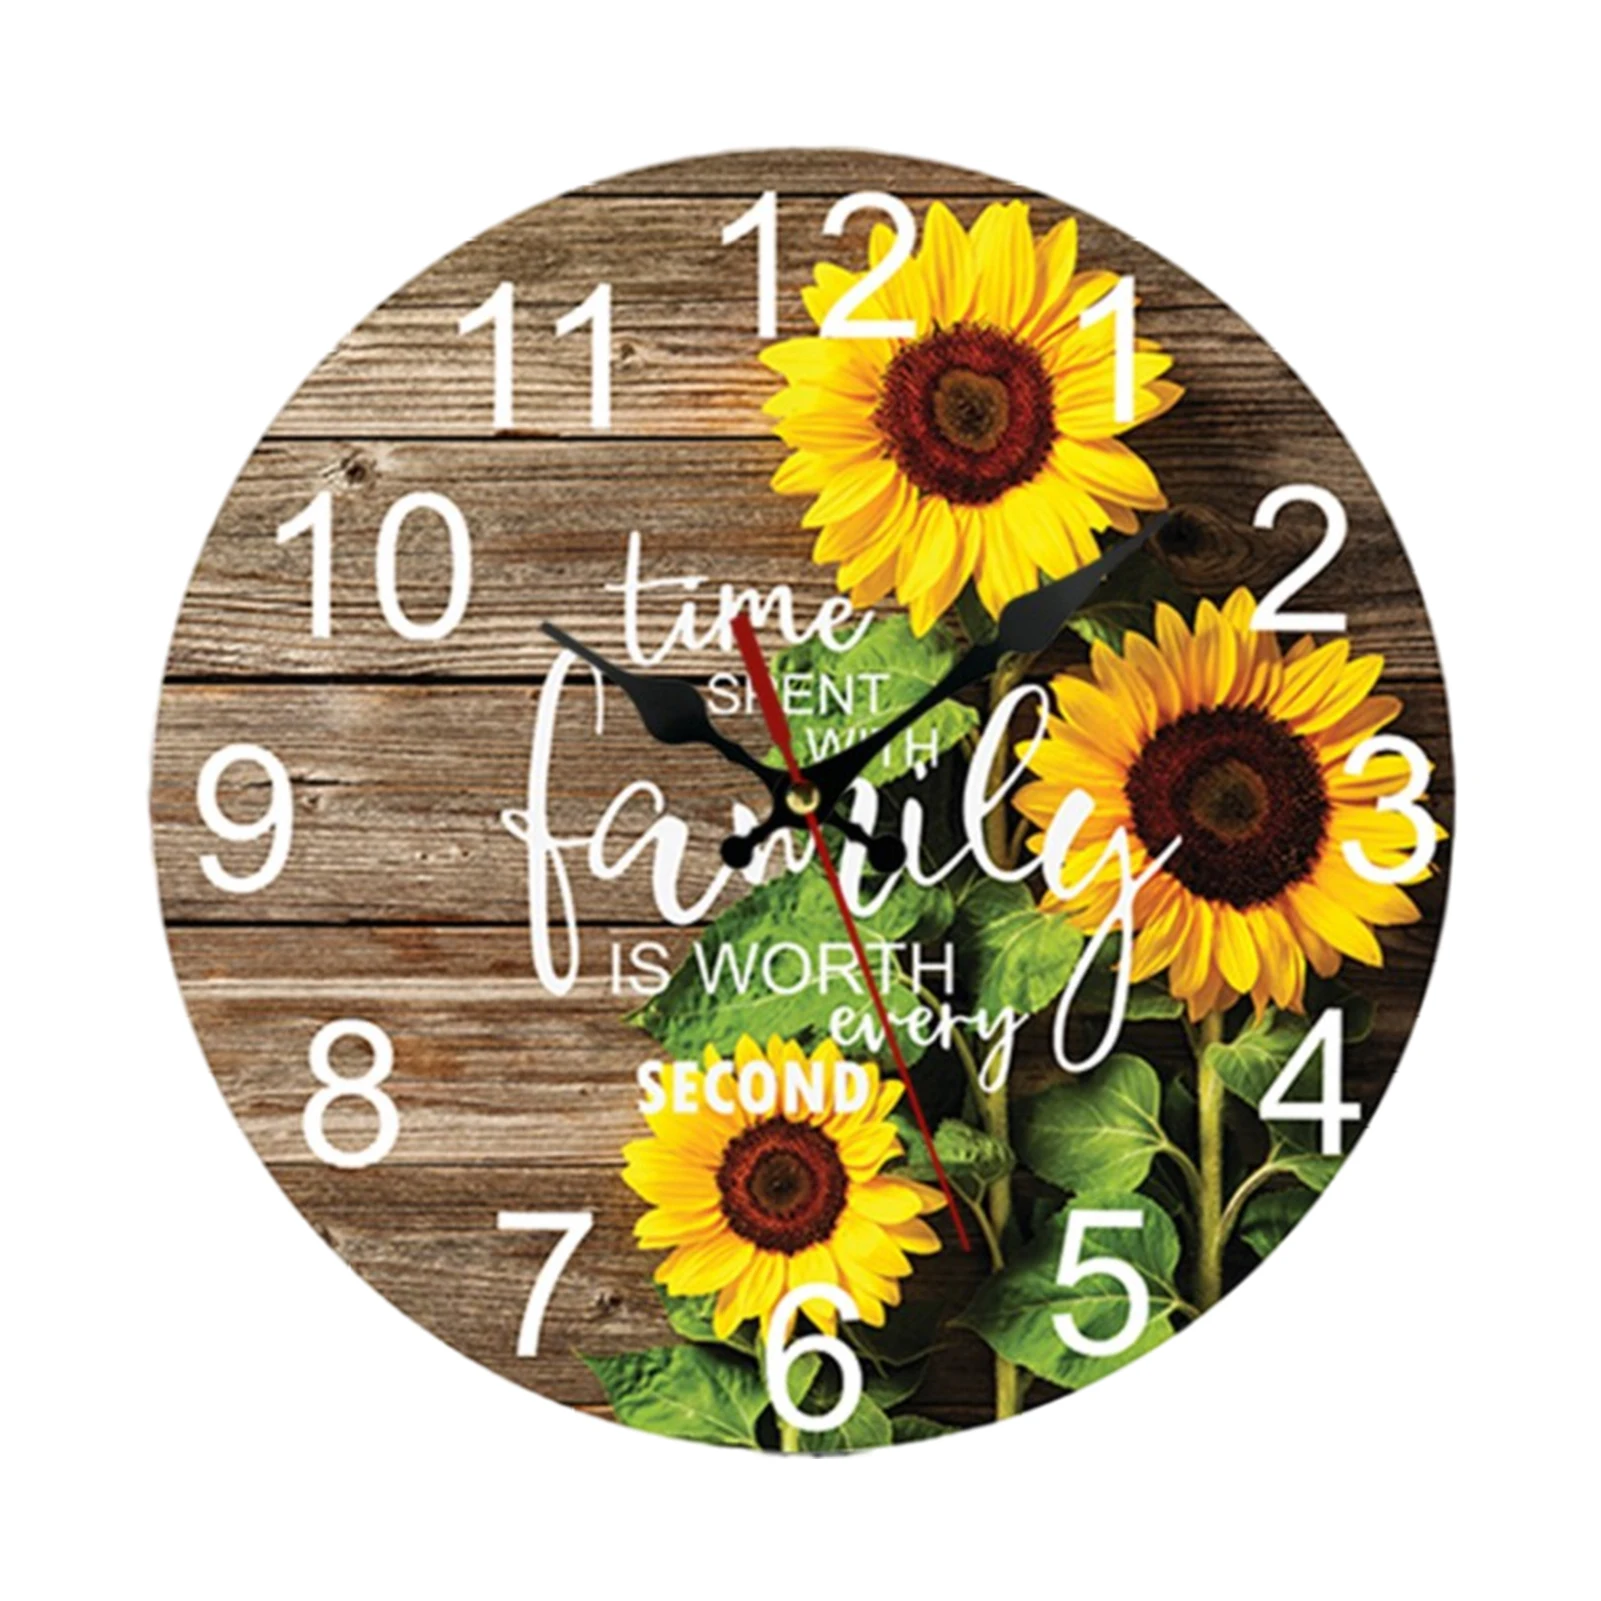 Wooden Wall Clock Battery Operated Silent Non-Ticking Decorative Battery Operated Wall Clock For Home Kitchen Living Room Office